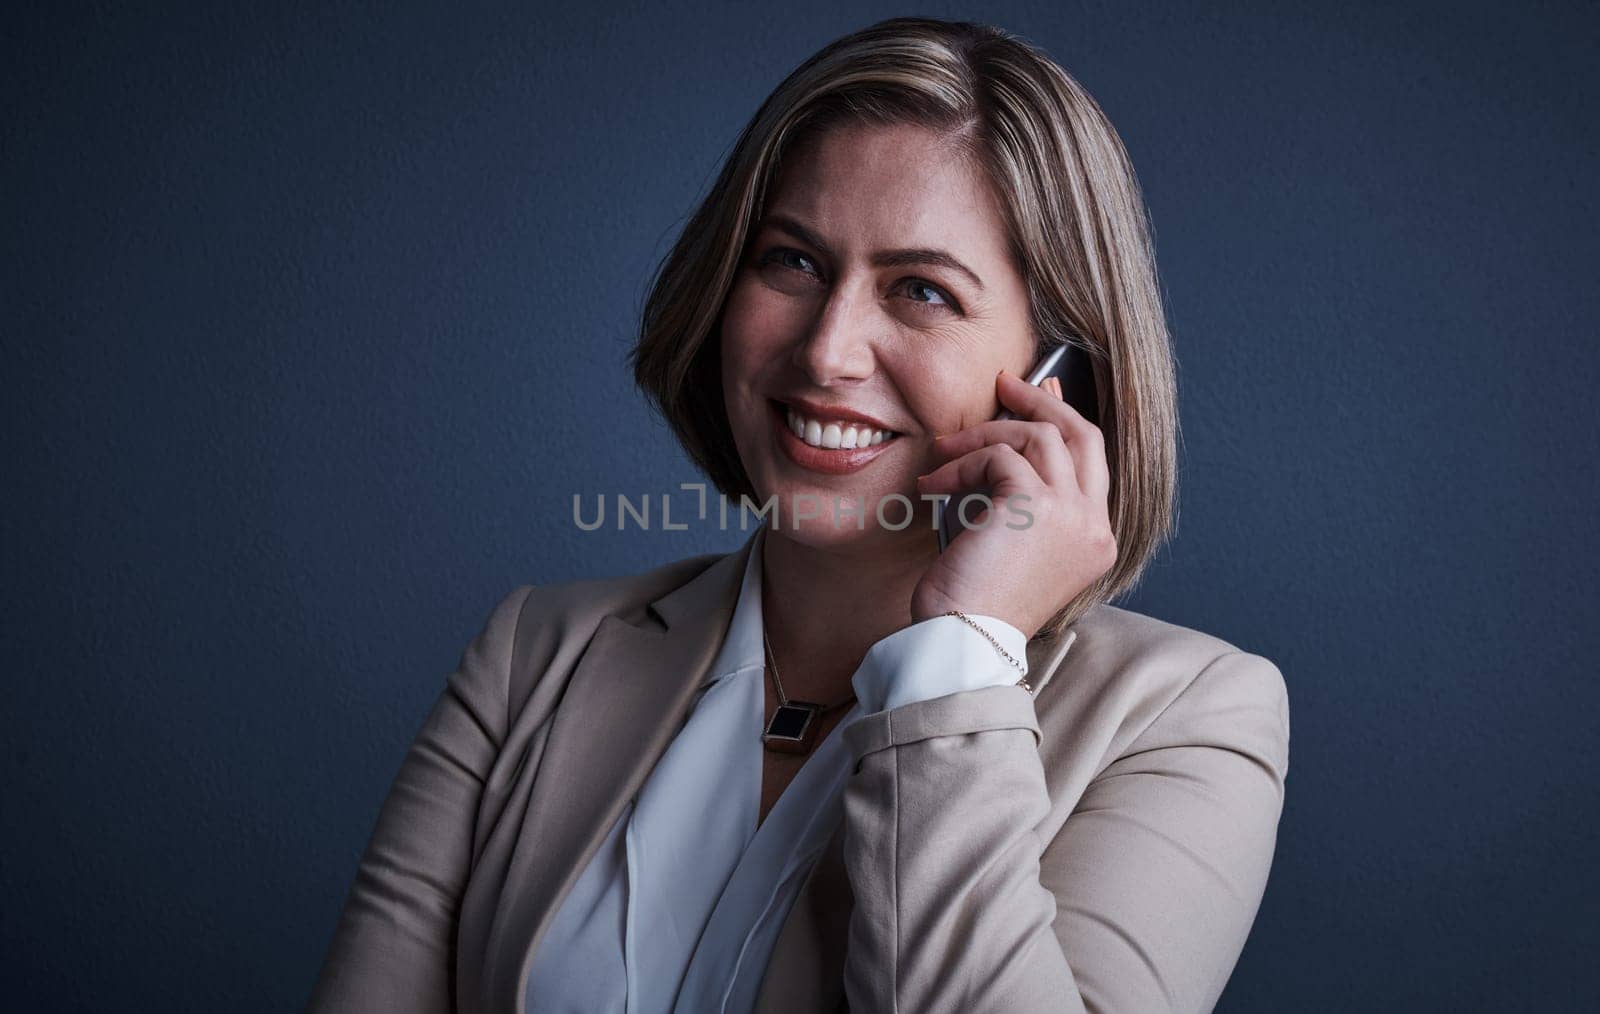 Communication is the key to success. Studio shot of an attractive young corporate businesswoman making a call against a dark background